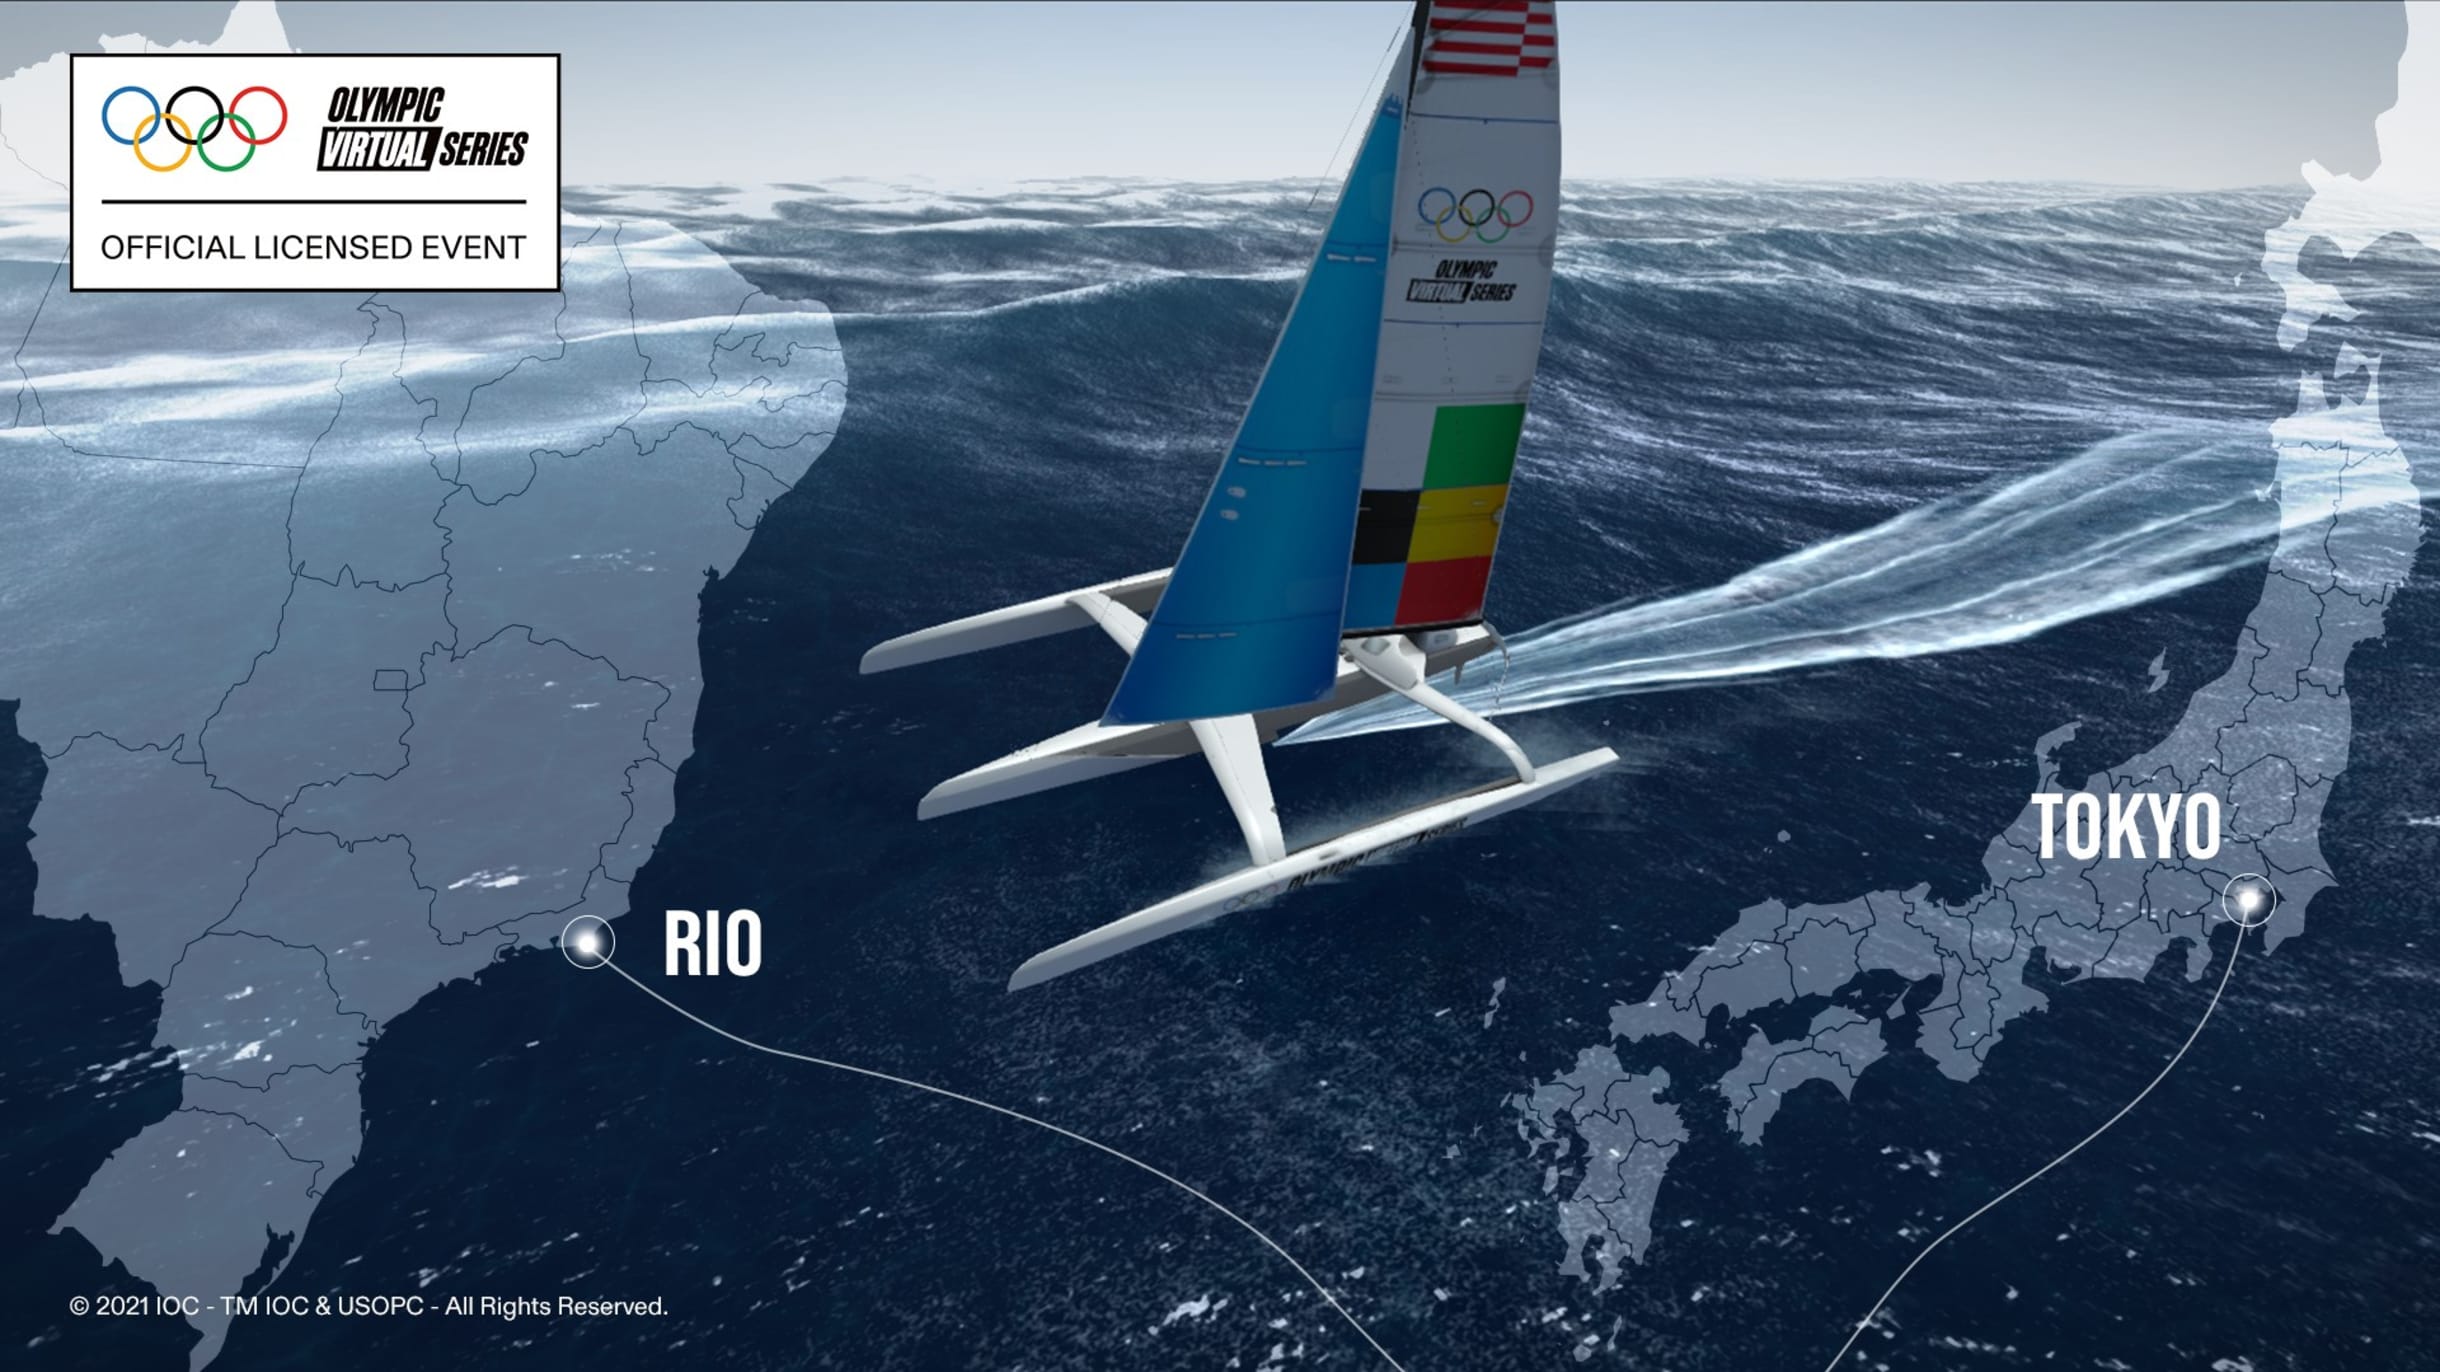 Olympic Virtual Series Sailing Event